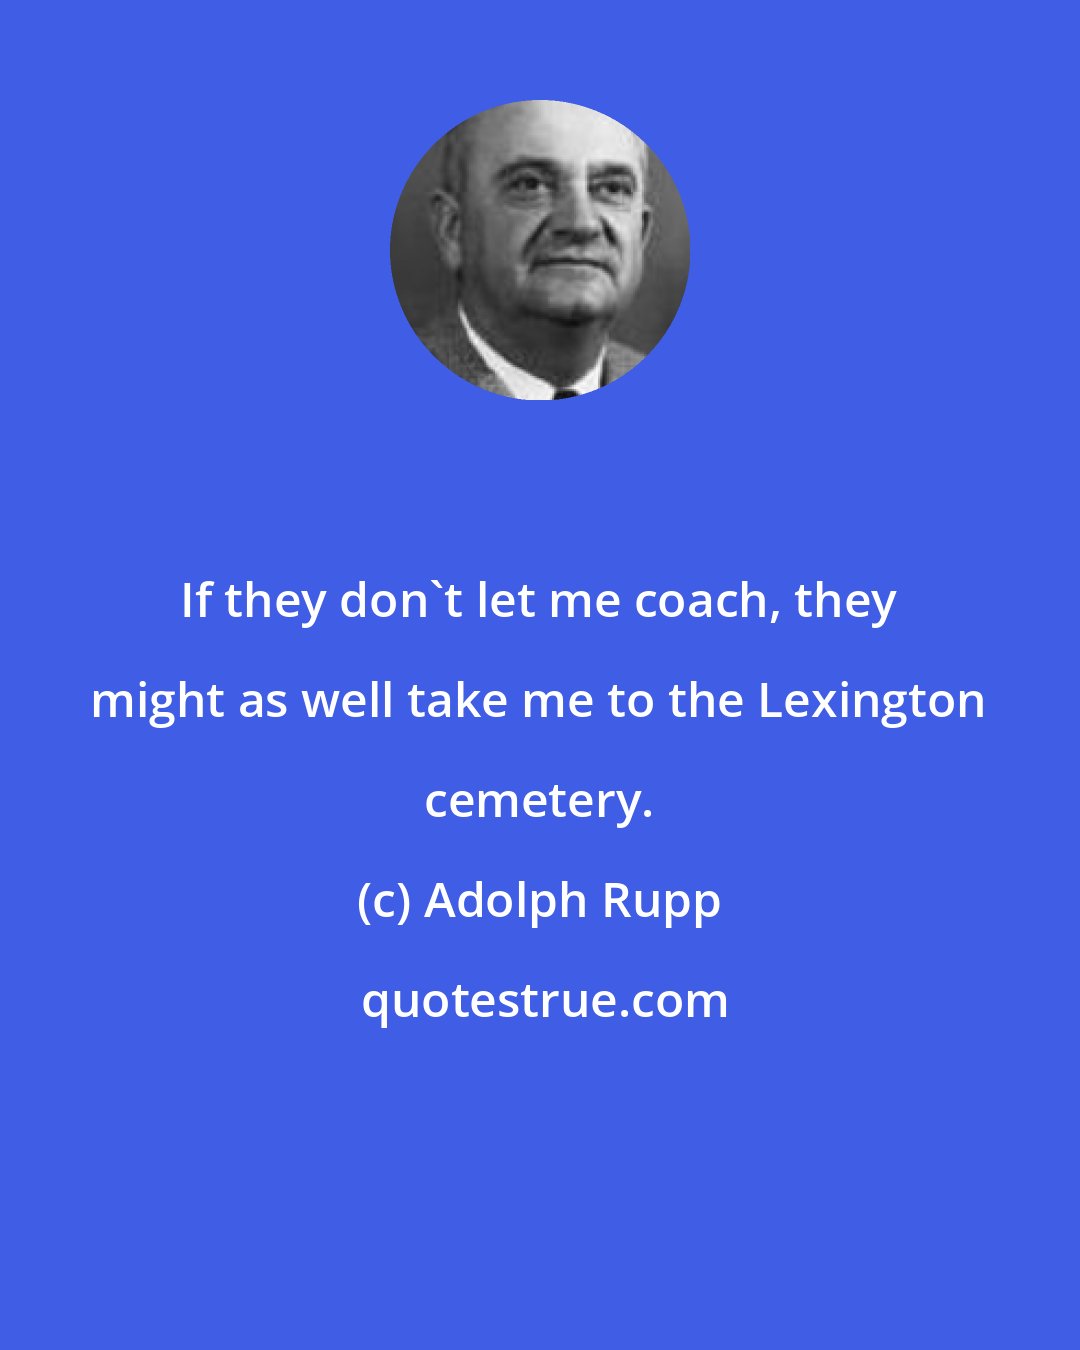 Adolph Rupp: If they don't let me coach, they might as well take me to the Lexington cemetery.